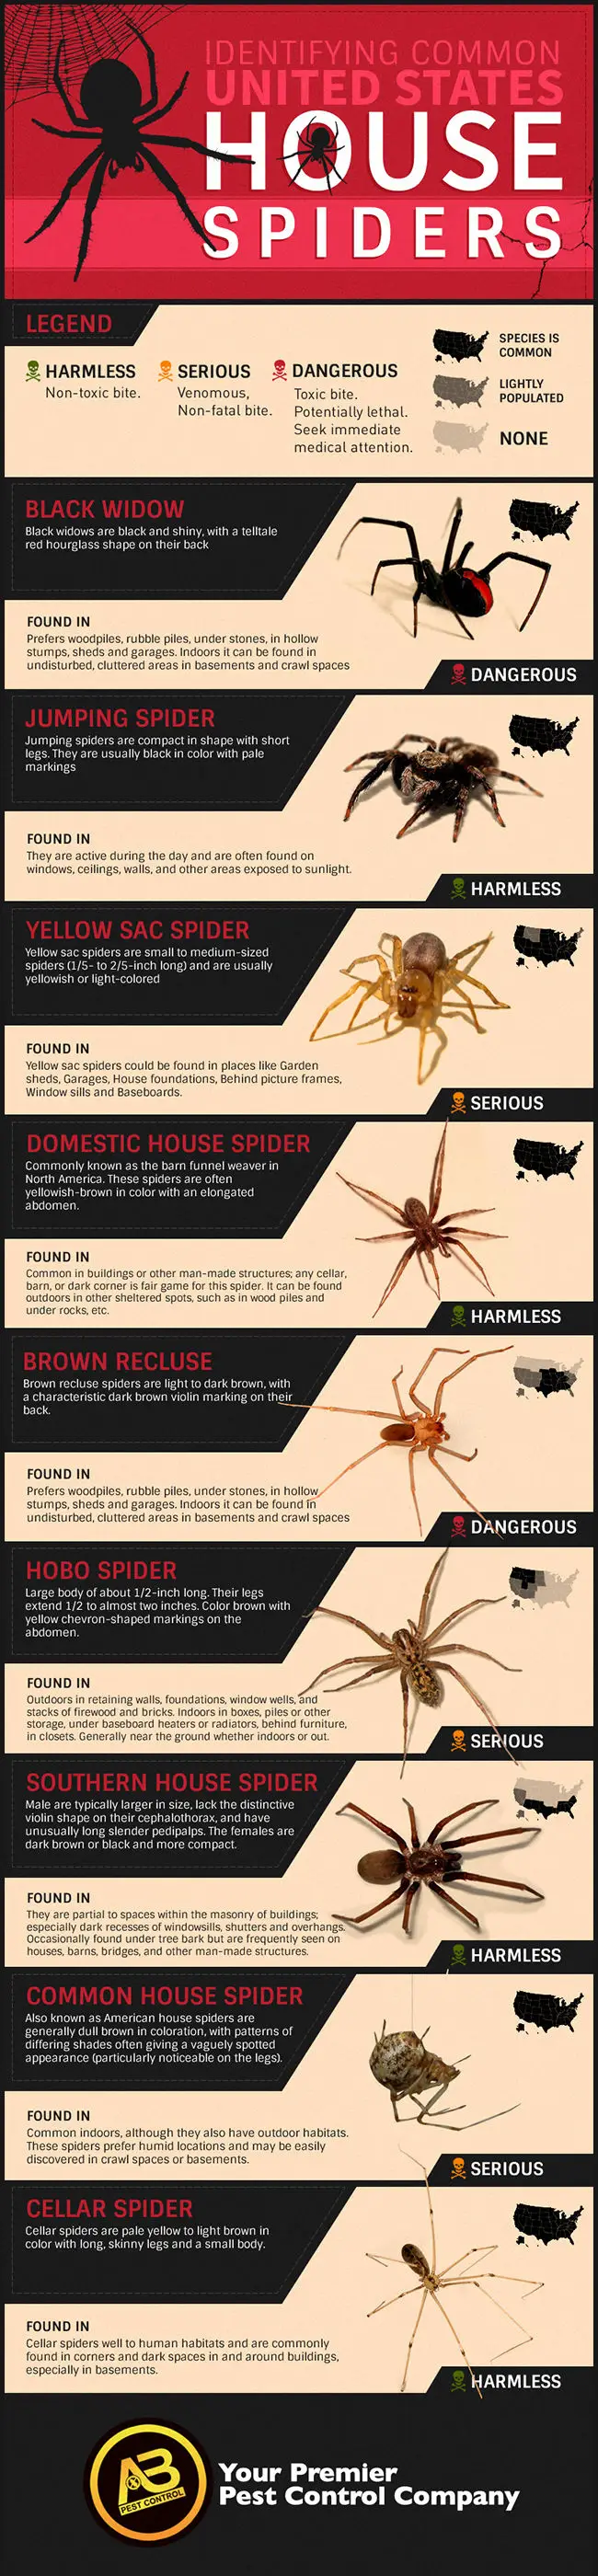 US spiders